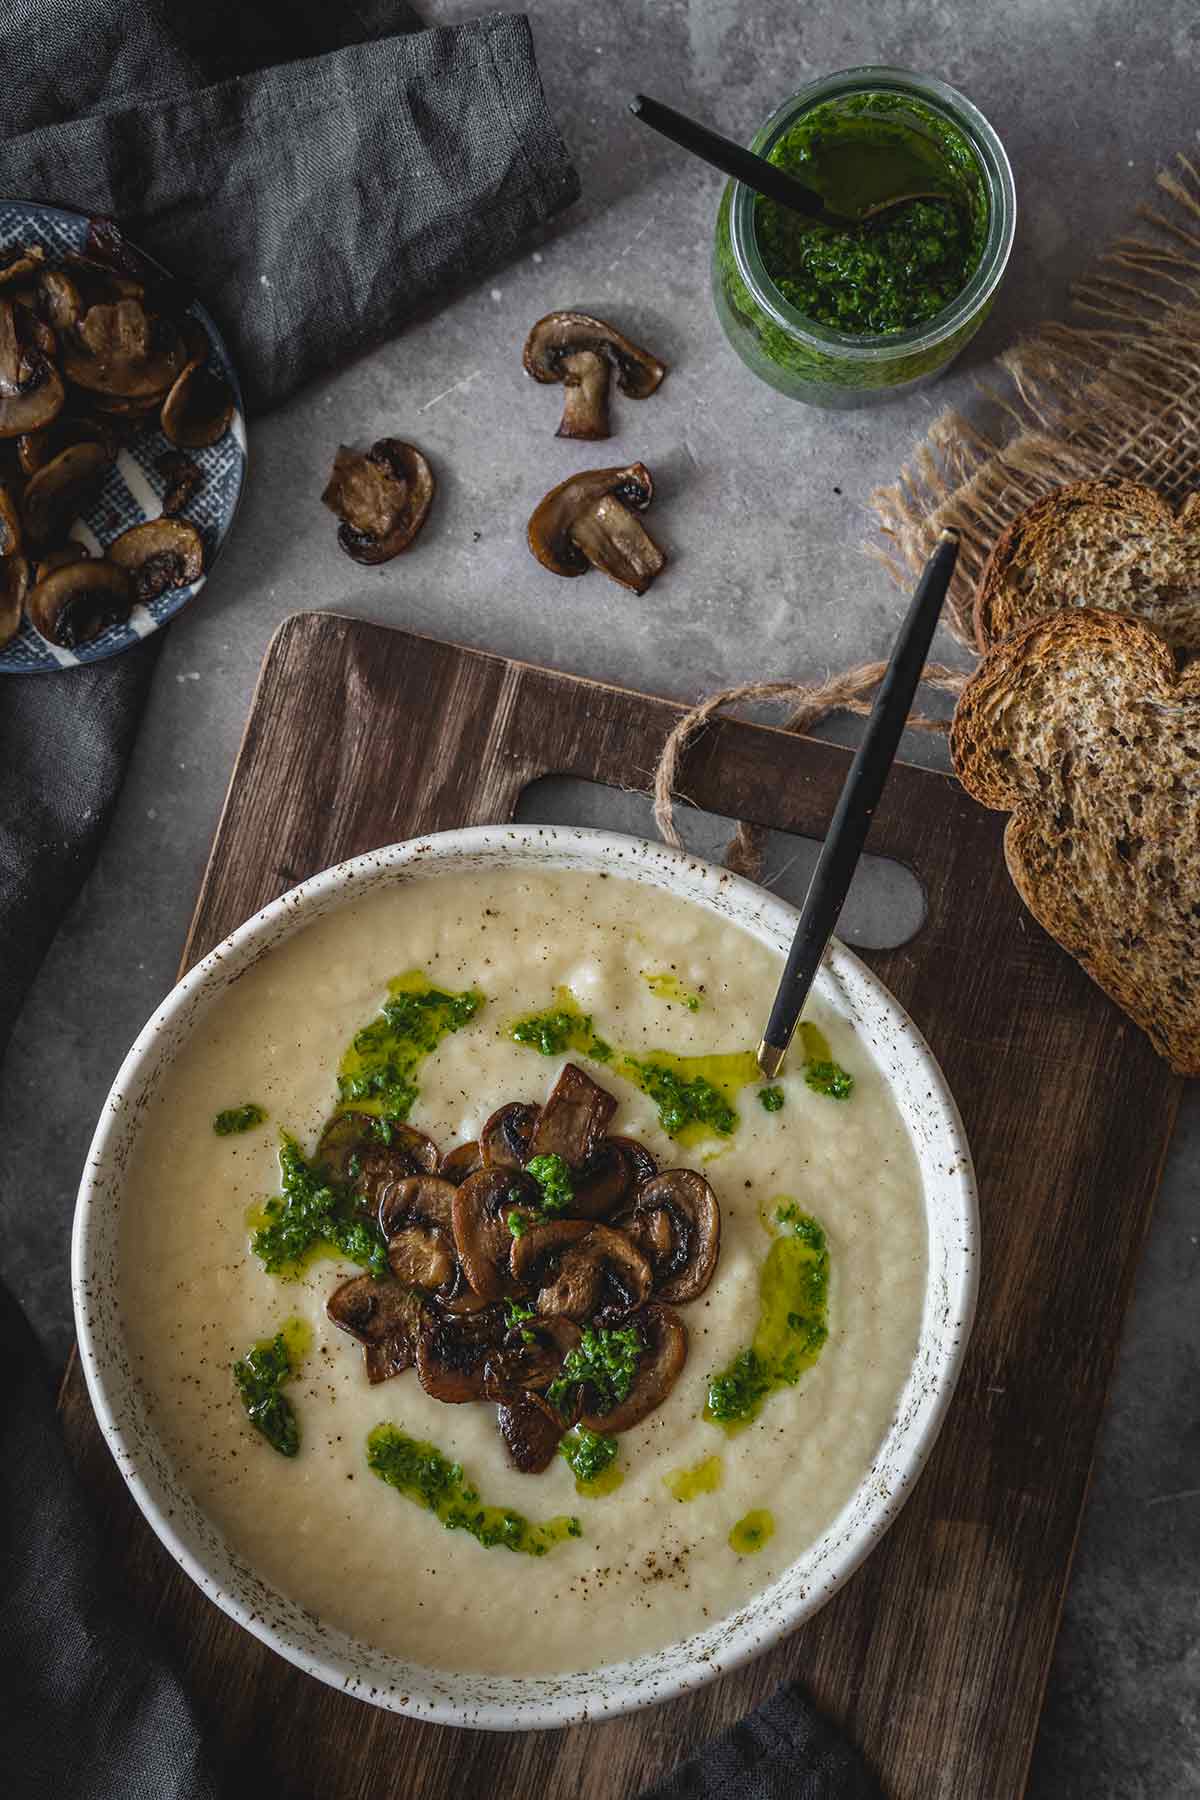 Celery root soup served in a bowl and topped with mushrooms